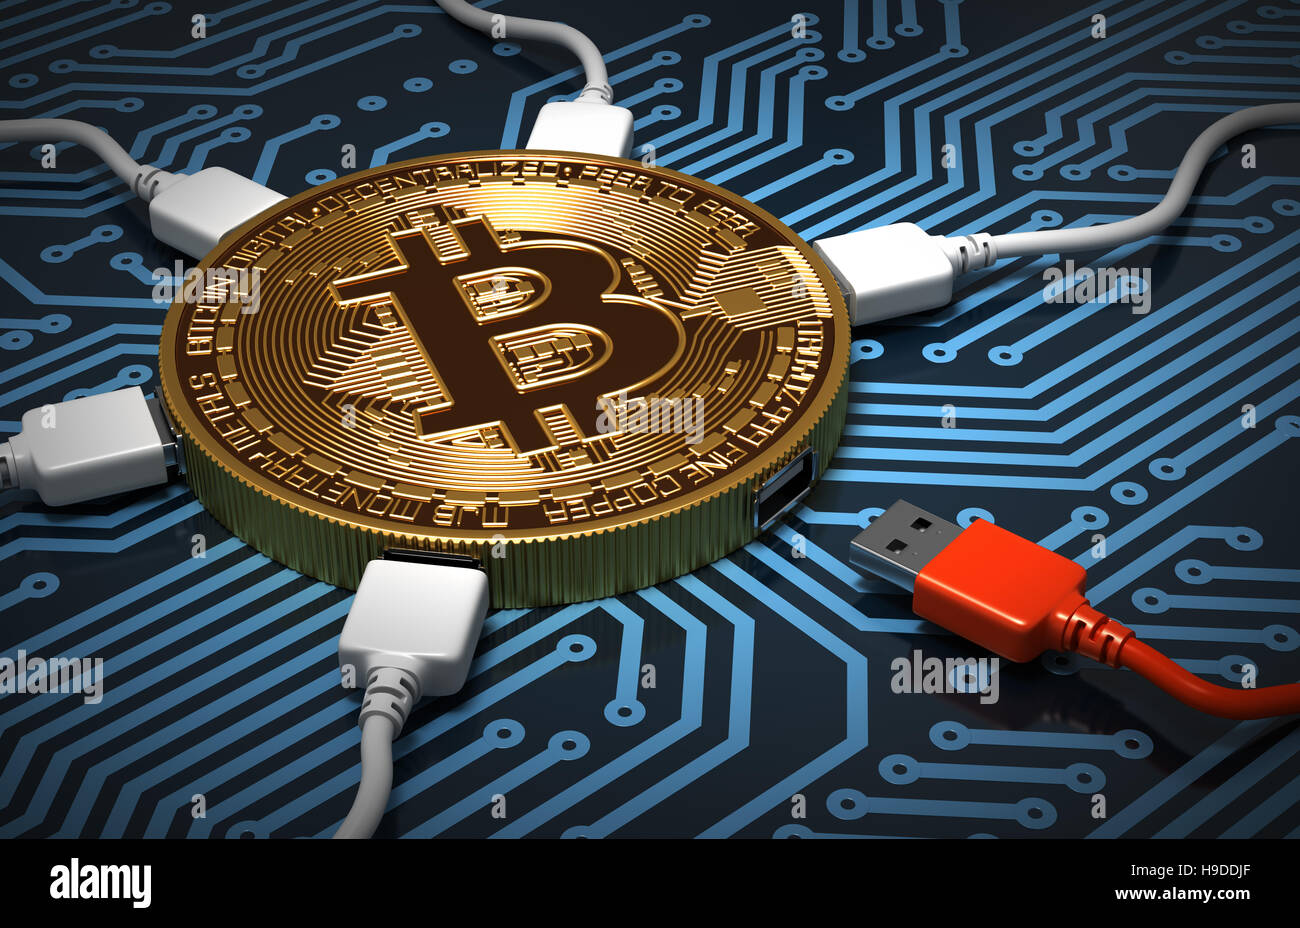 Red And White USB Wires Connected To The Bitcoin On Printed Circuit Board. 3D Illustration. Stock Photo